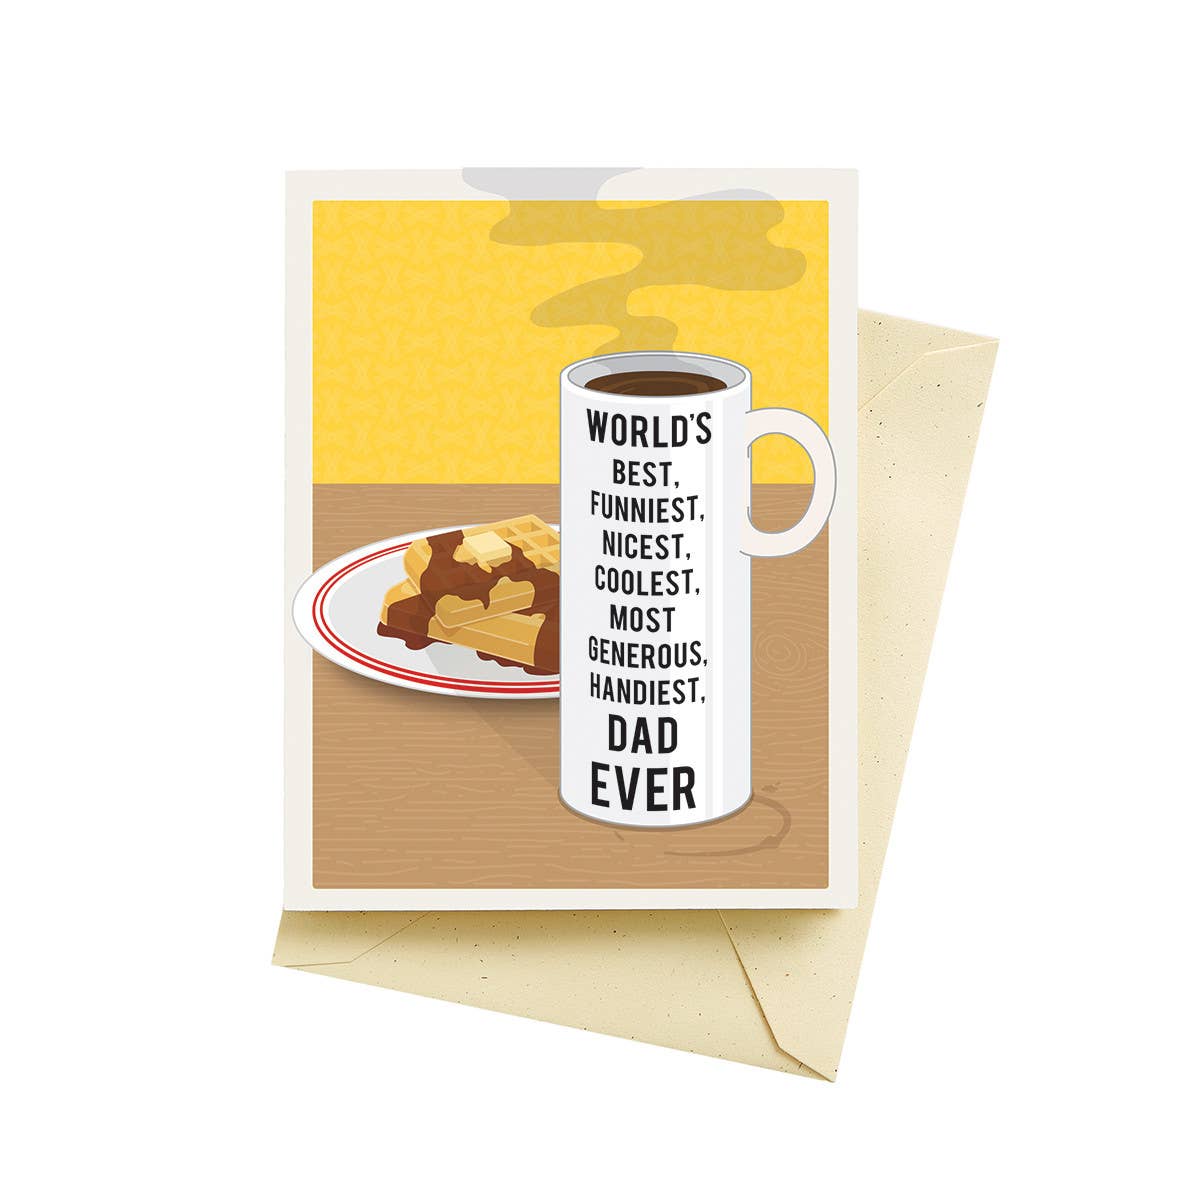 Best Mug Father's Day Cards